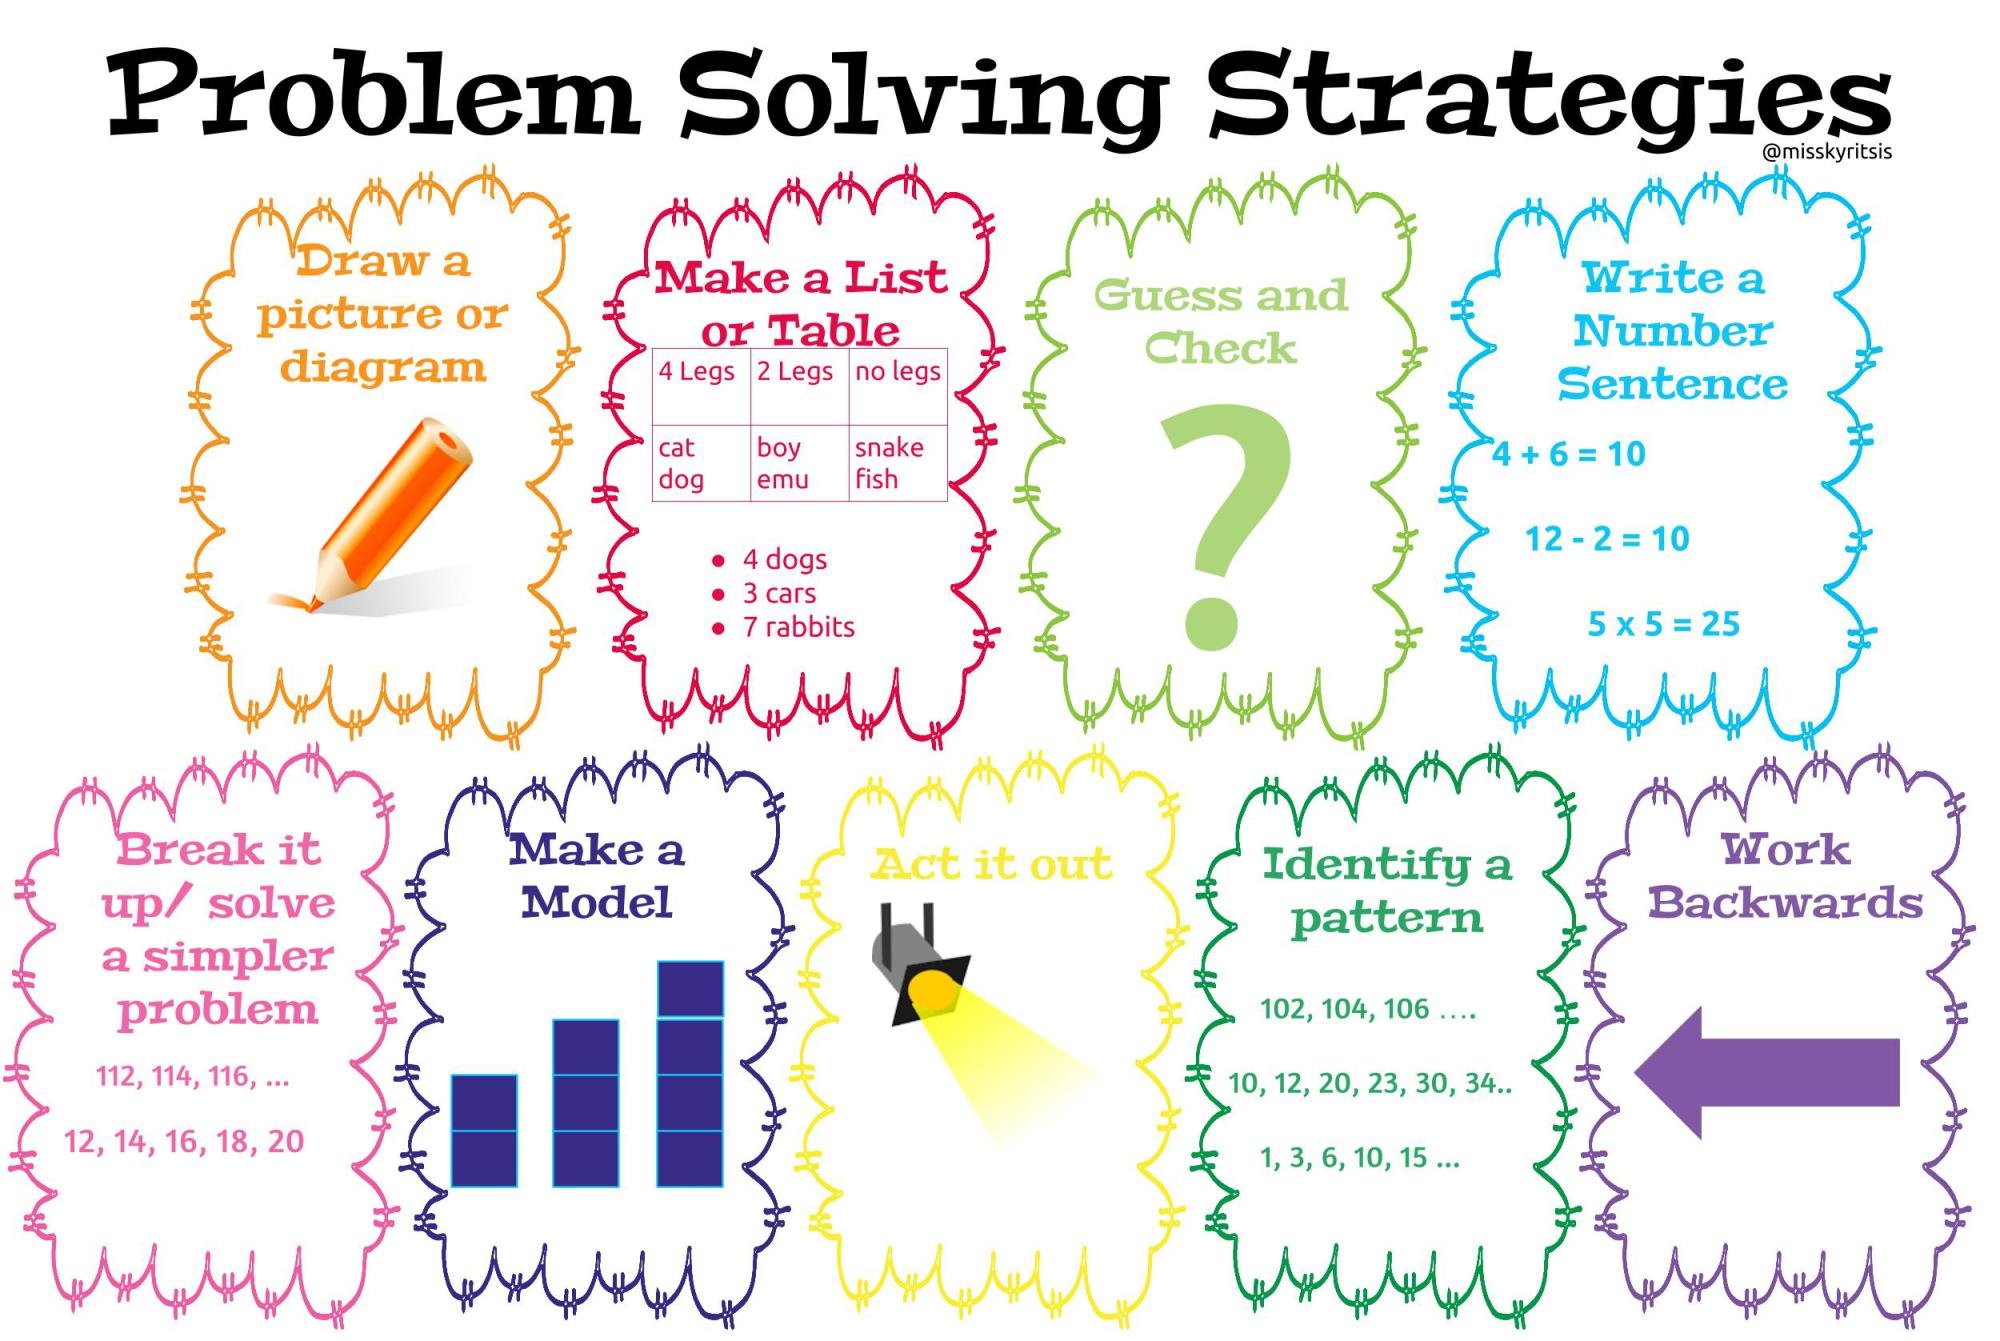 problem solving approaches